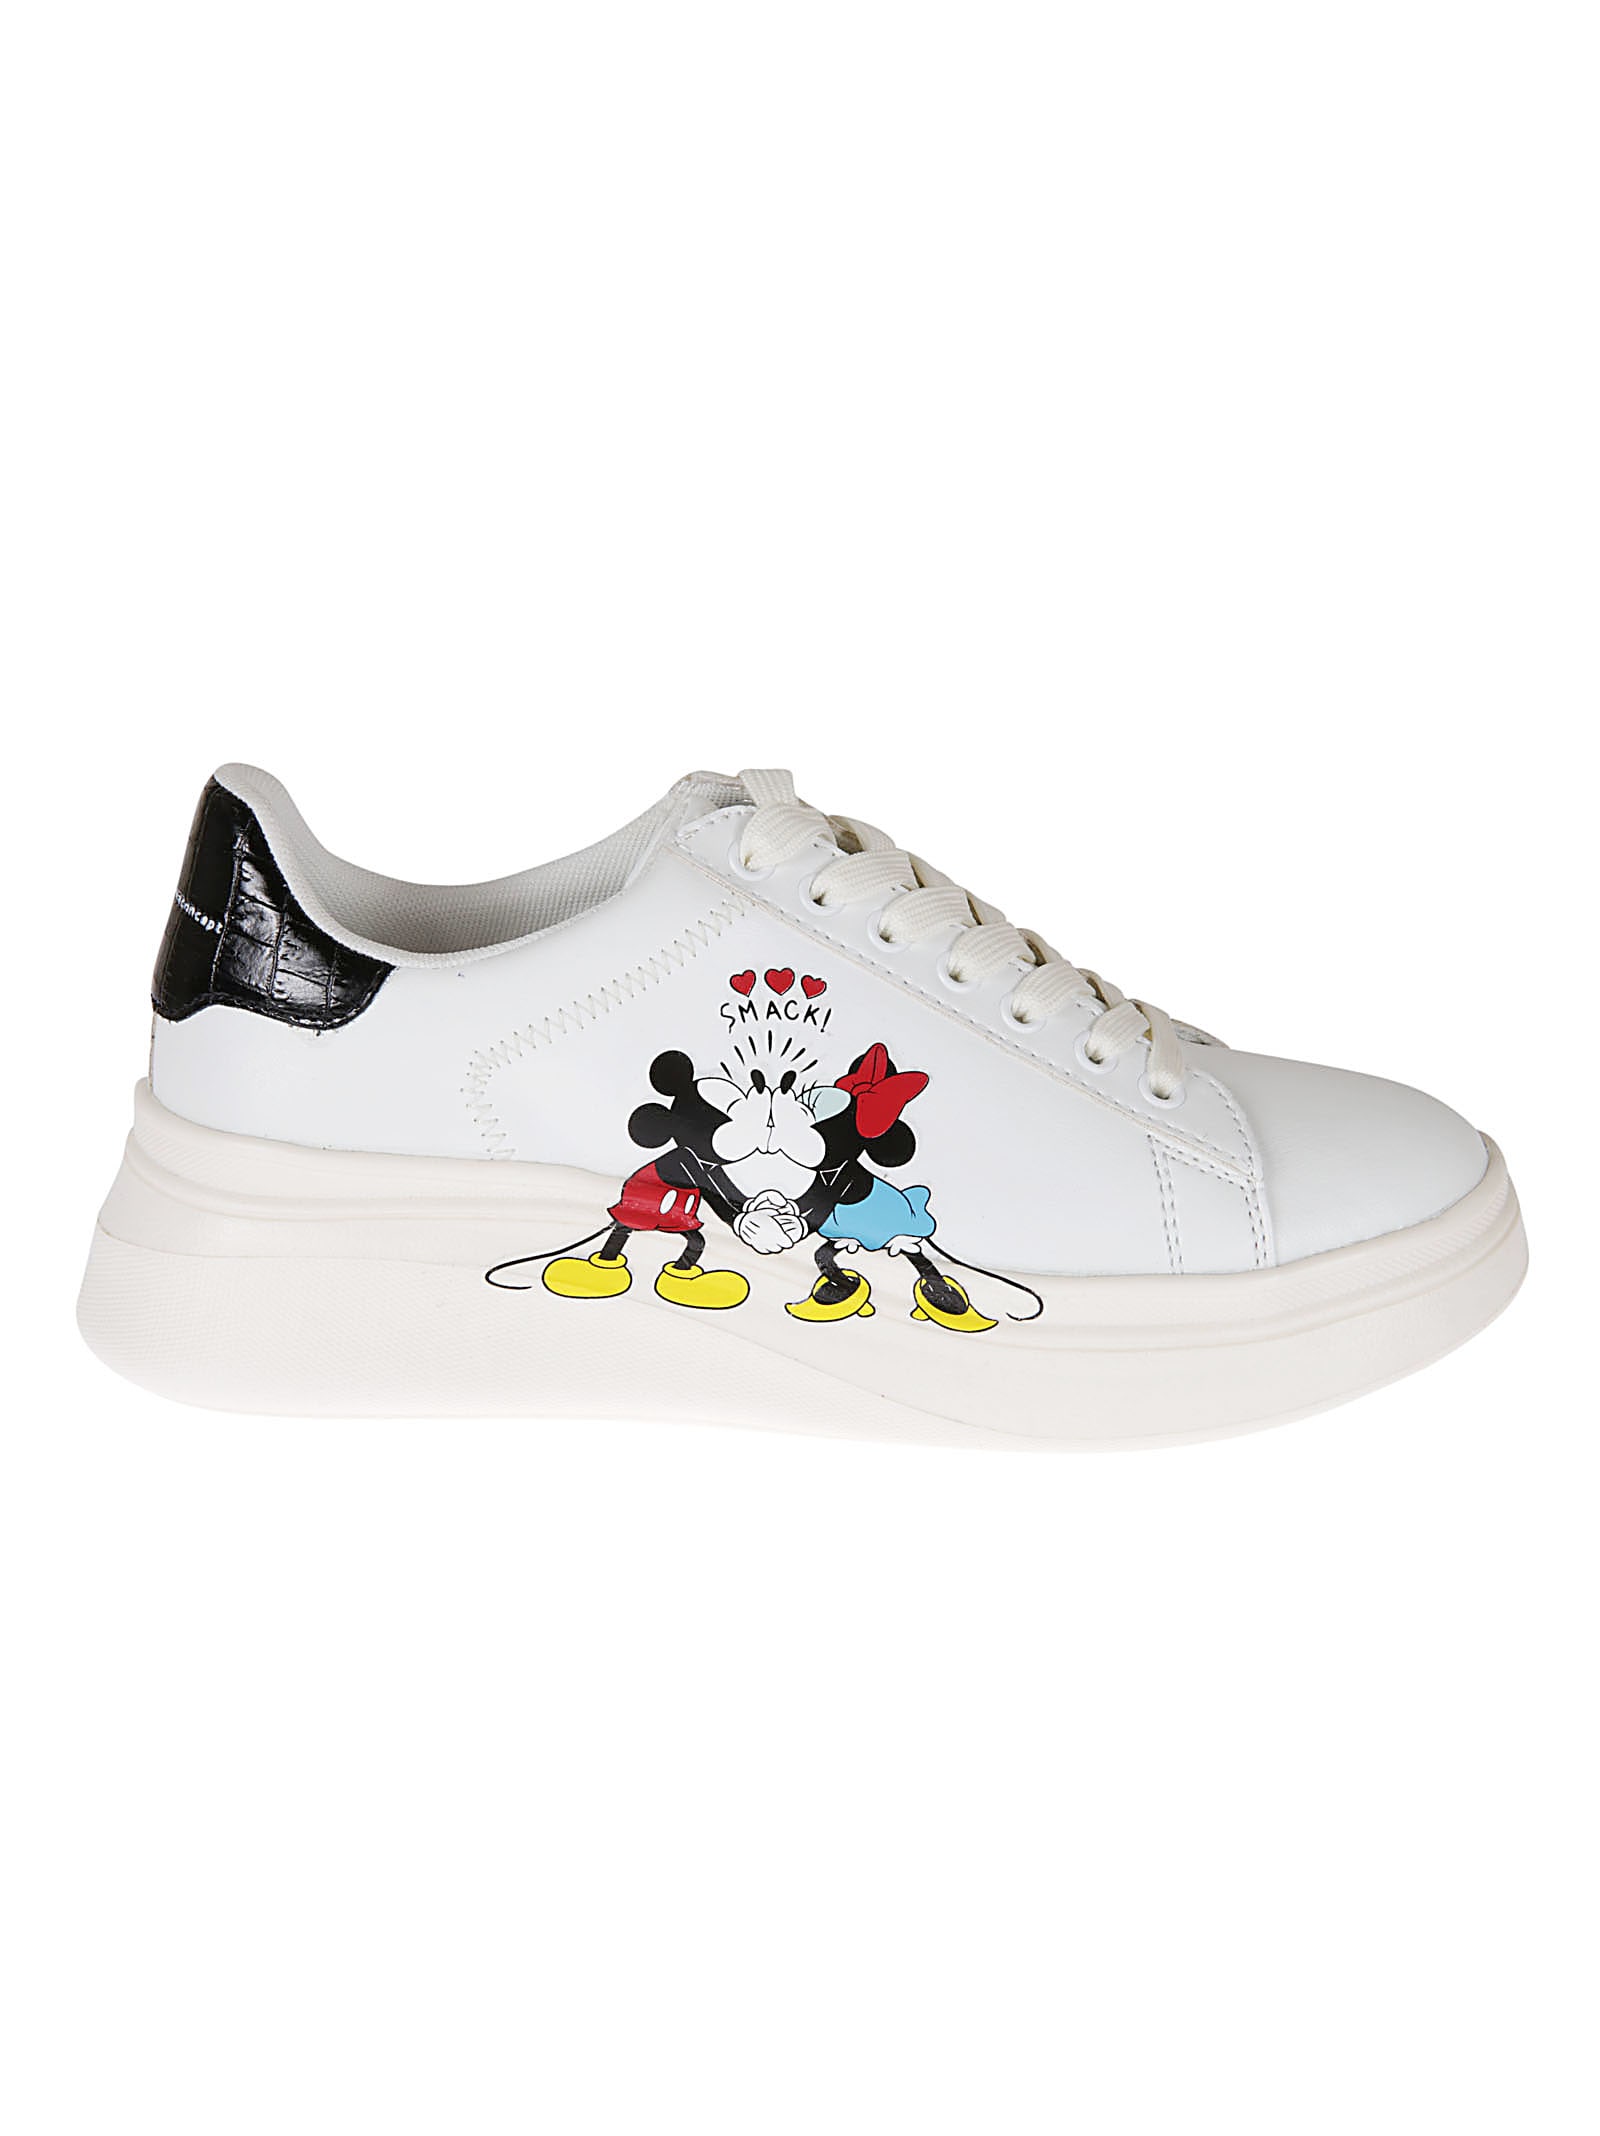 MOA MASTER OF ARTS MICKEY & MINNIE MOUSE KISS DOUBLE GALLERY SNEAKERS